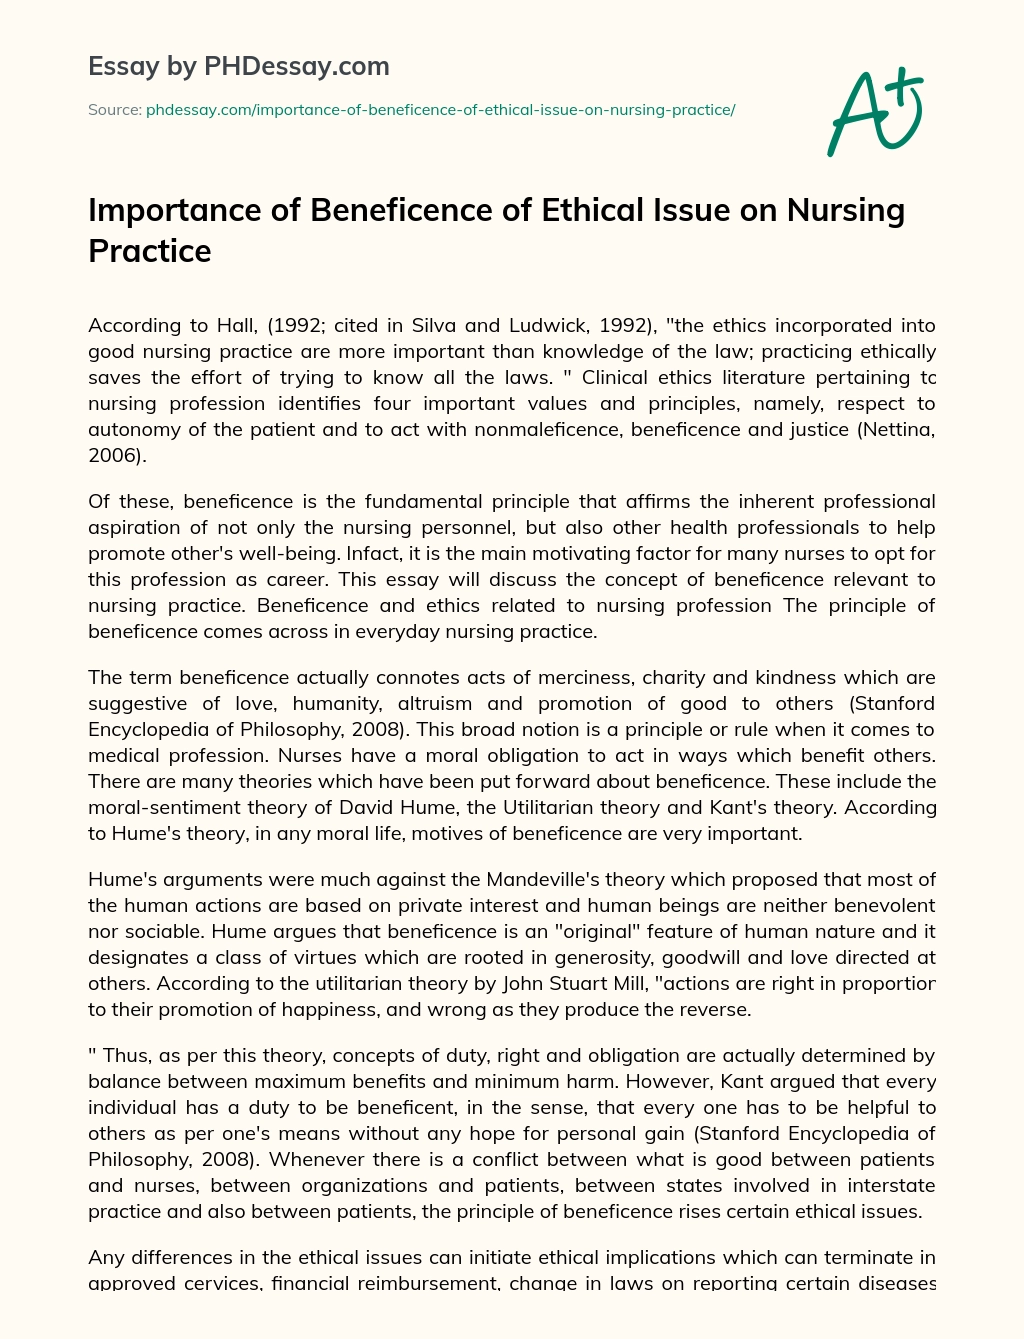 Importance of Beneficence of Ethical Issue on Nursing Practice essay